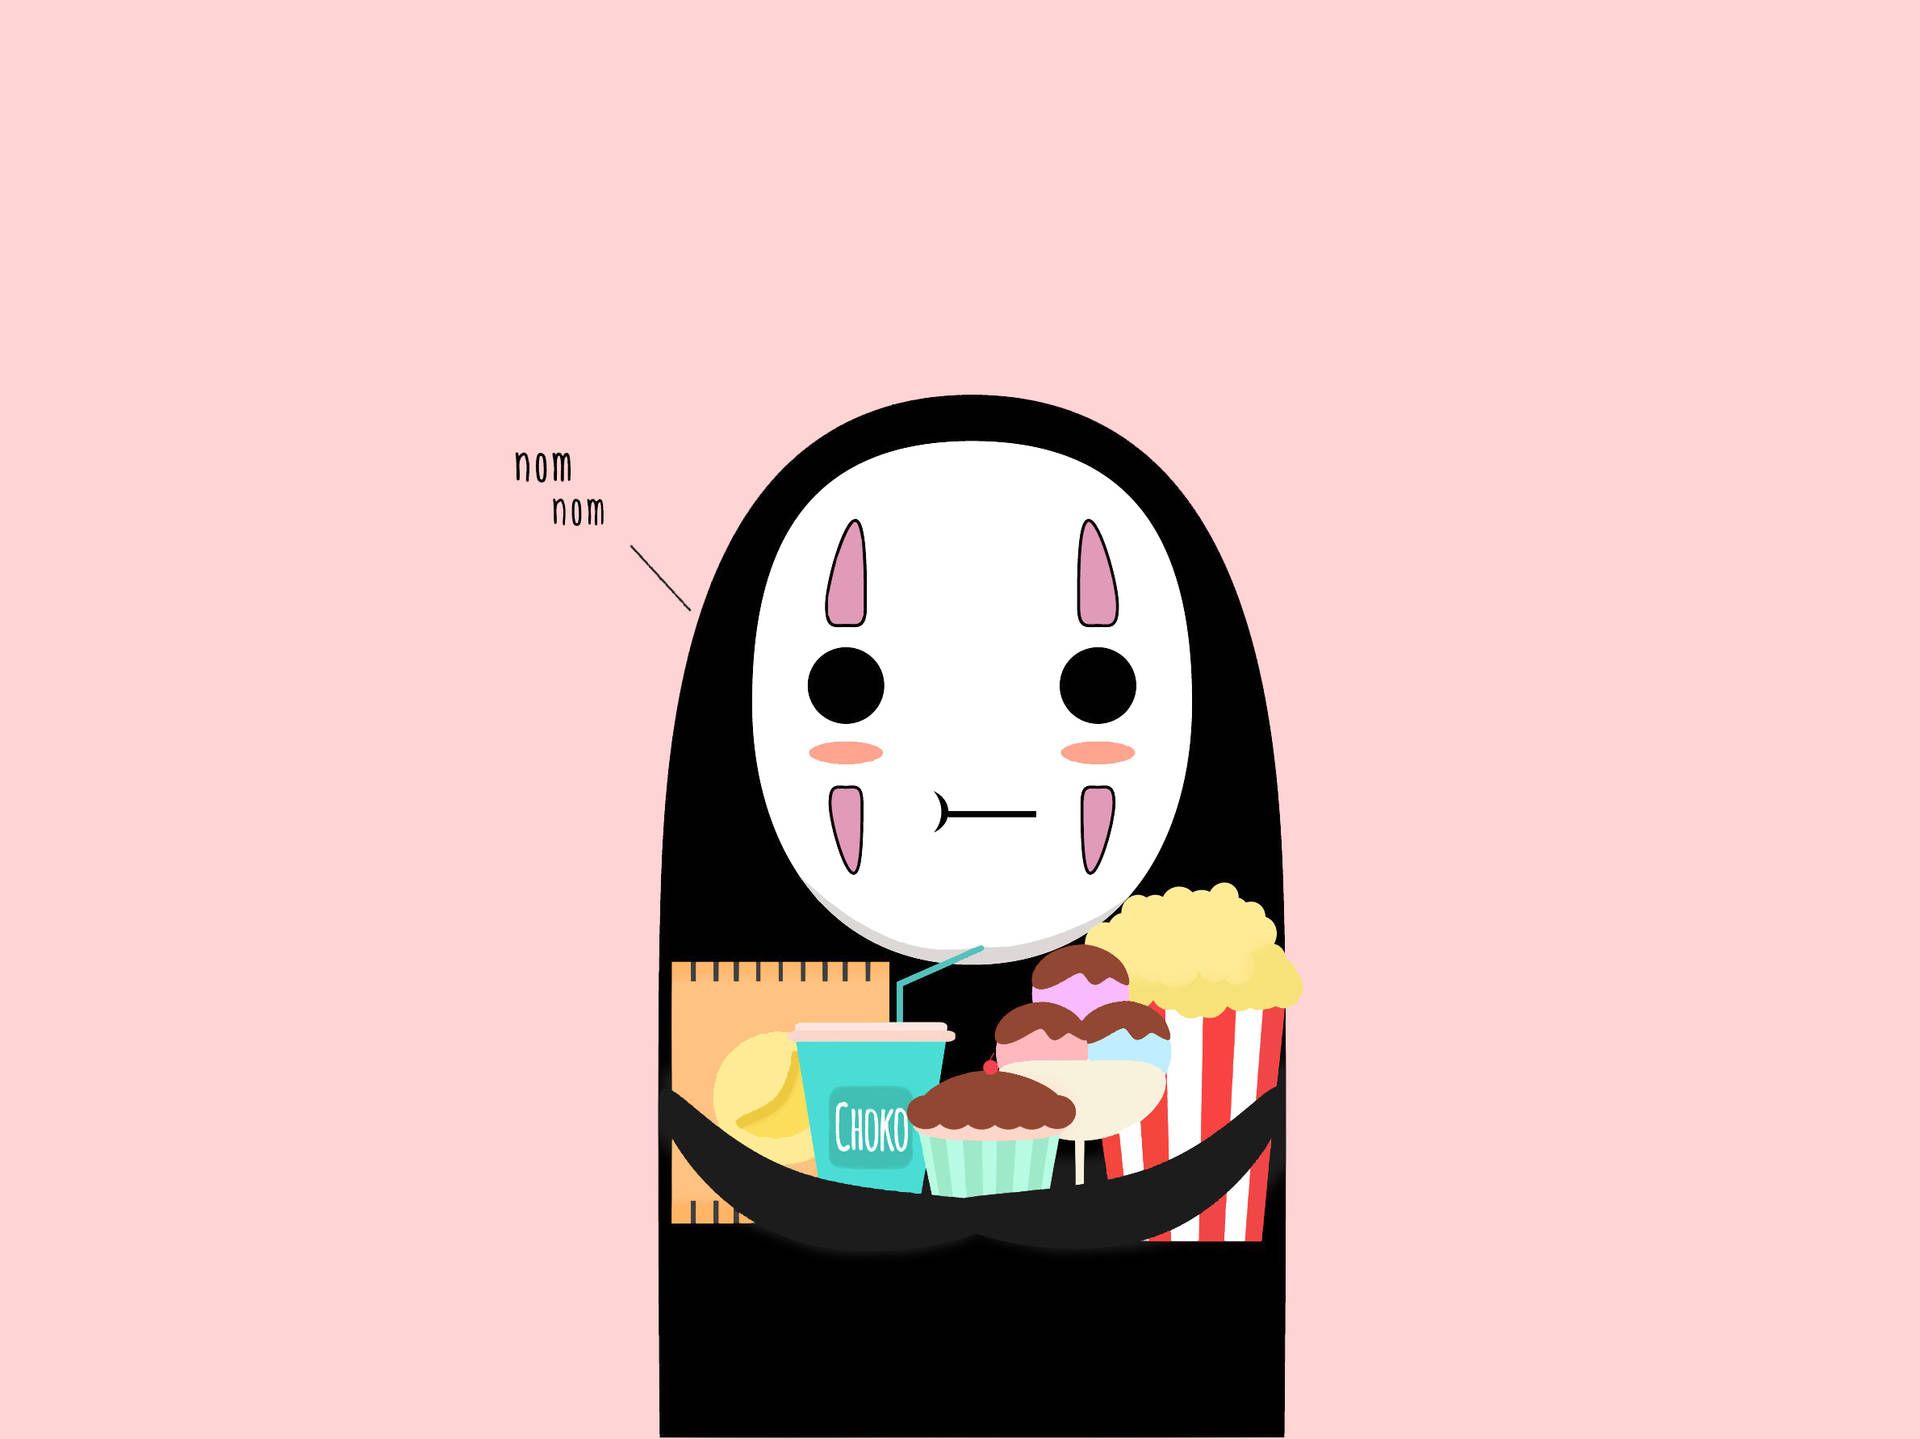 Free No Face Wallpaper Downloads, No Face Wallpaper for FREE